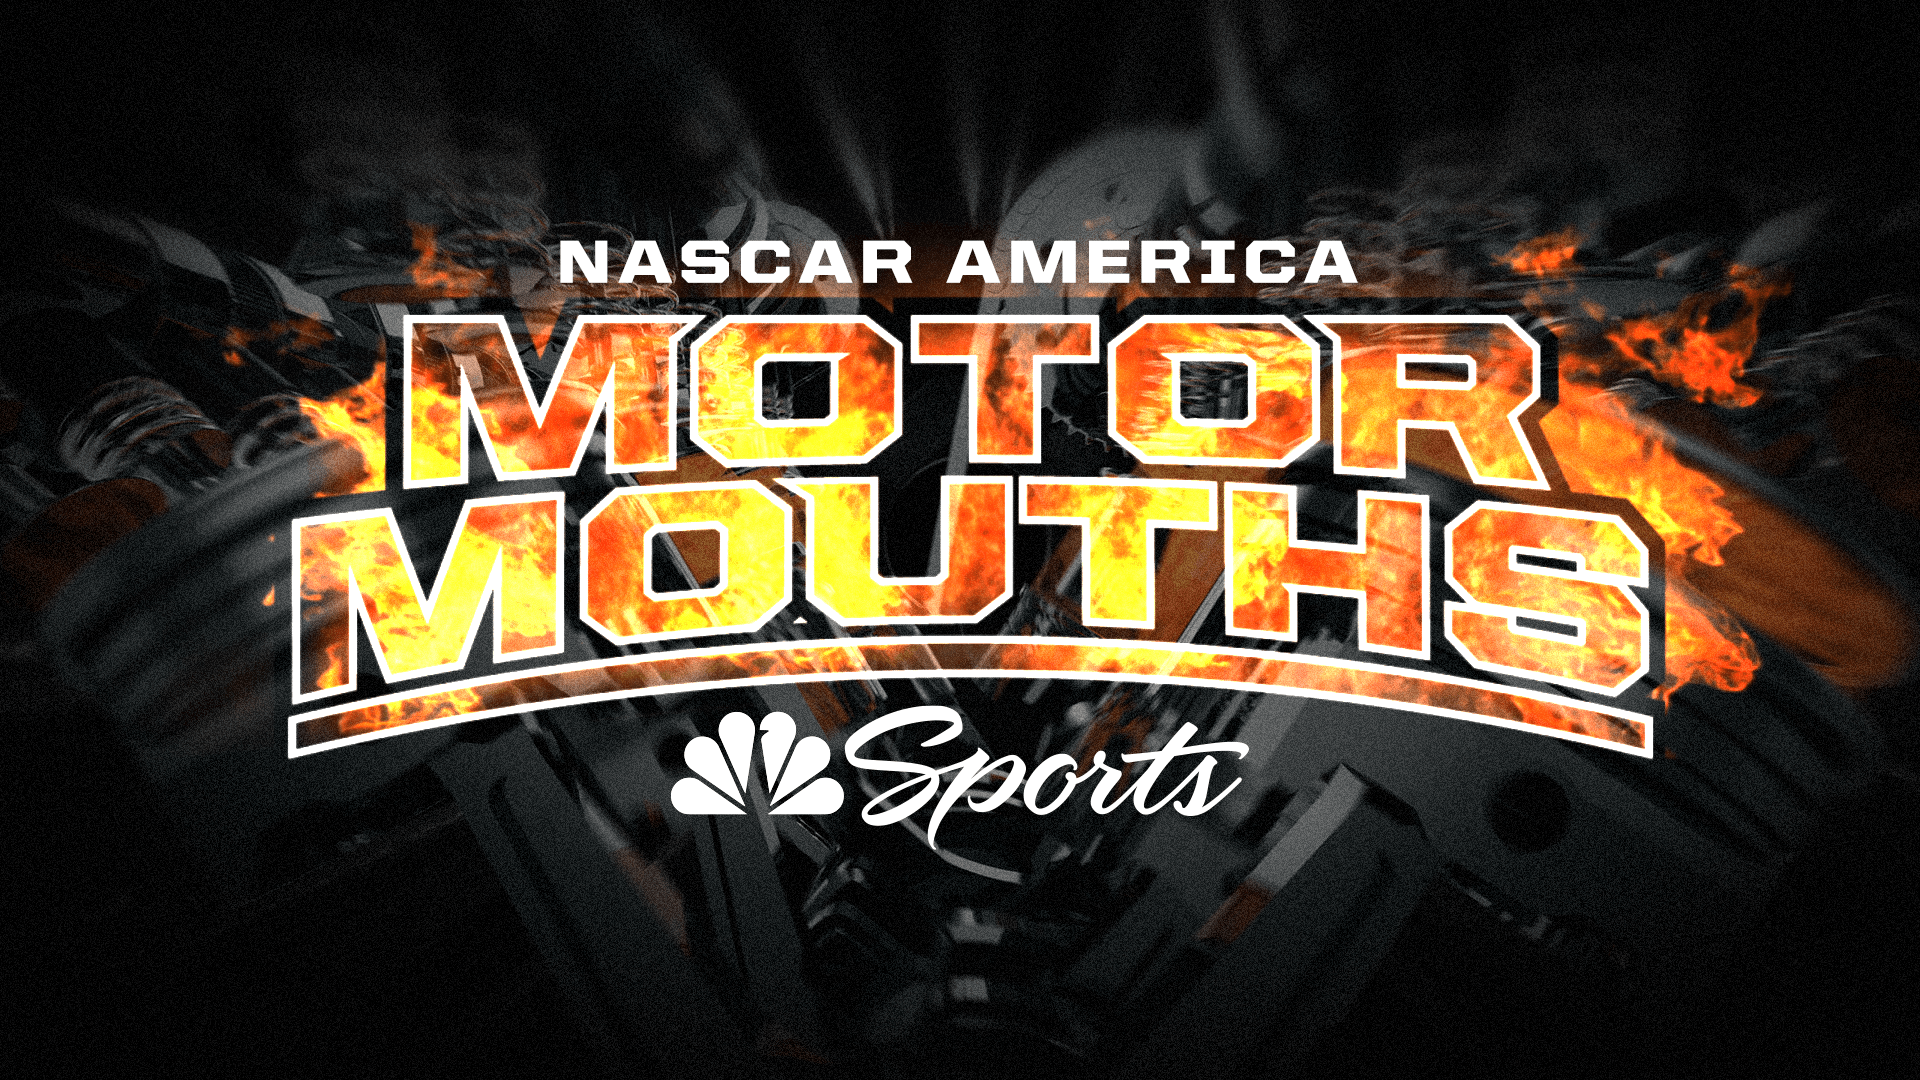 Peacock Adds NASCAR Content with ‘NASCAR America Motormouths’ Starting